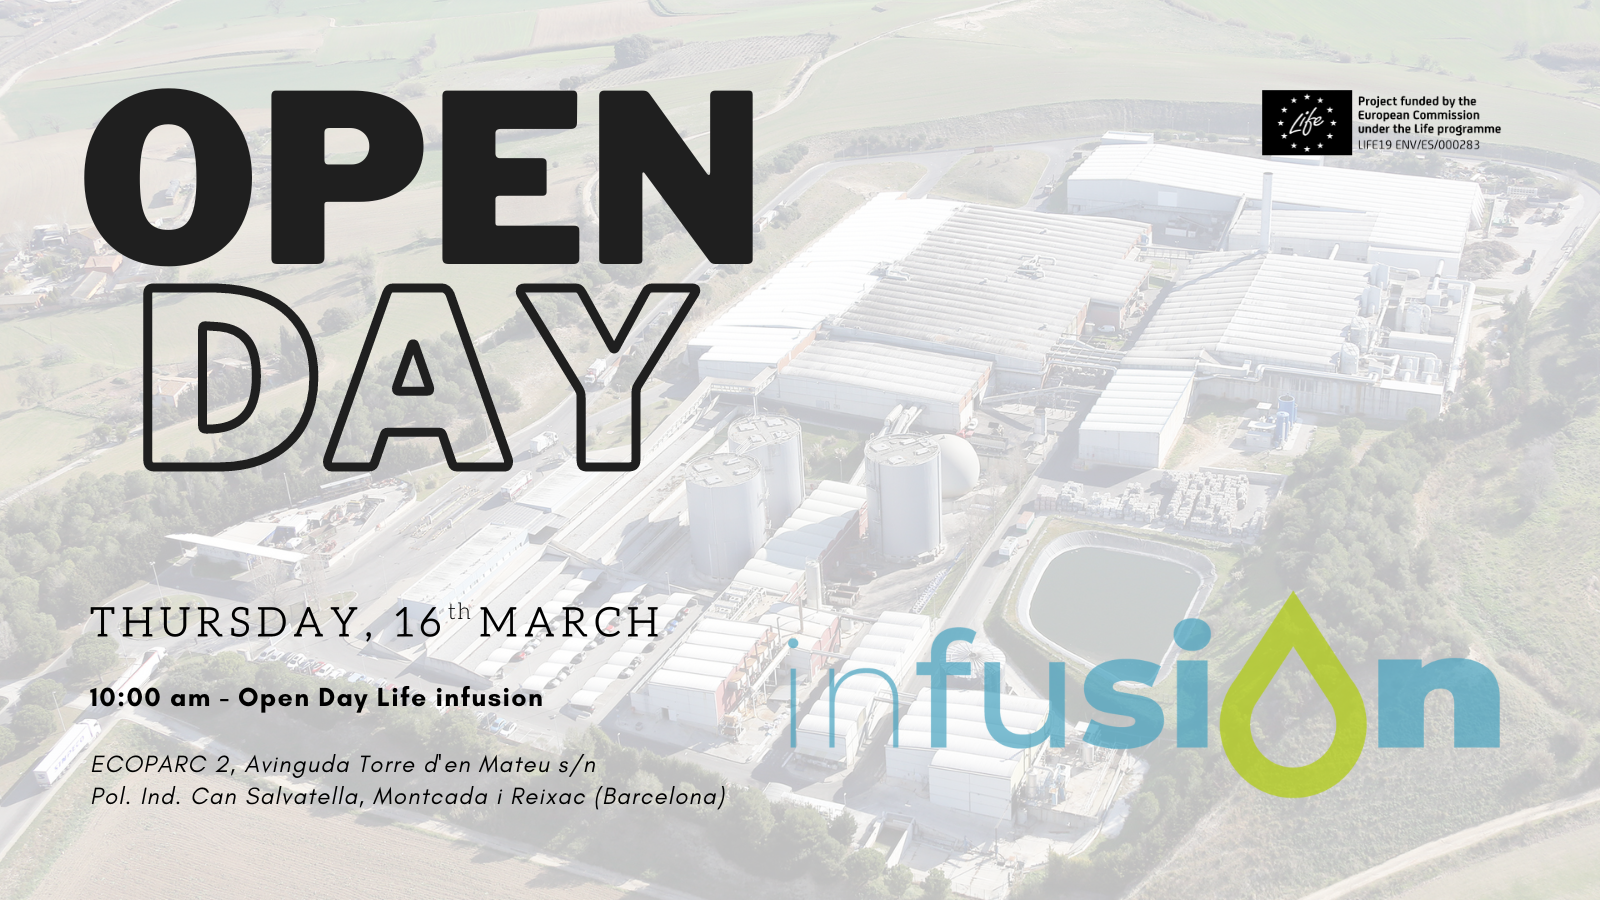 Announcement of life infusion Open Day, 20 April at 10:00h. Location: Ecoparc 2, Barcelona